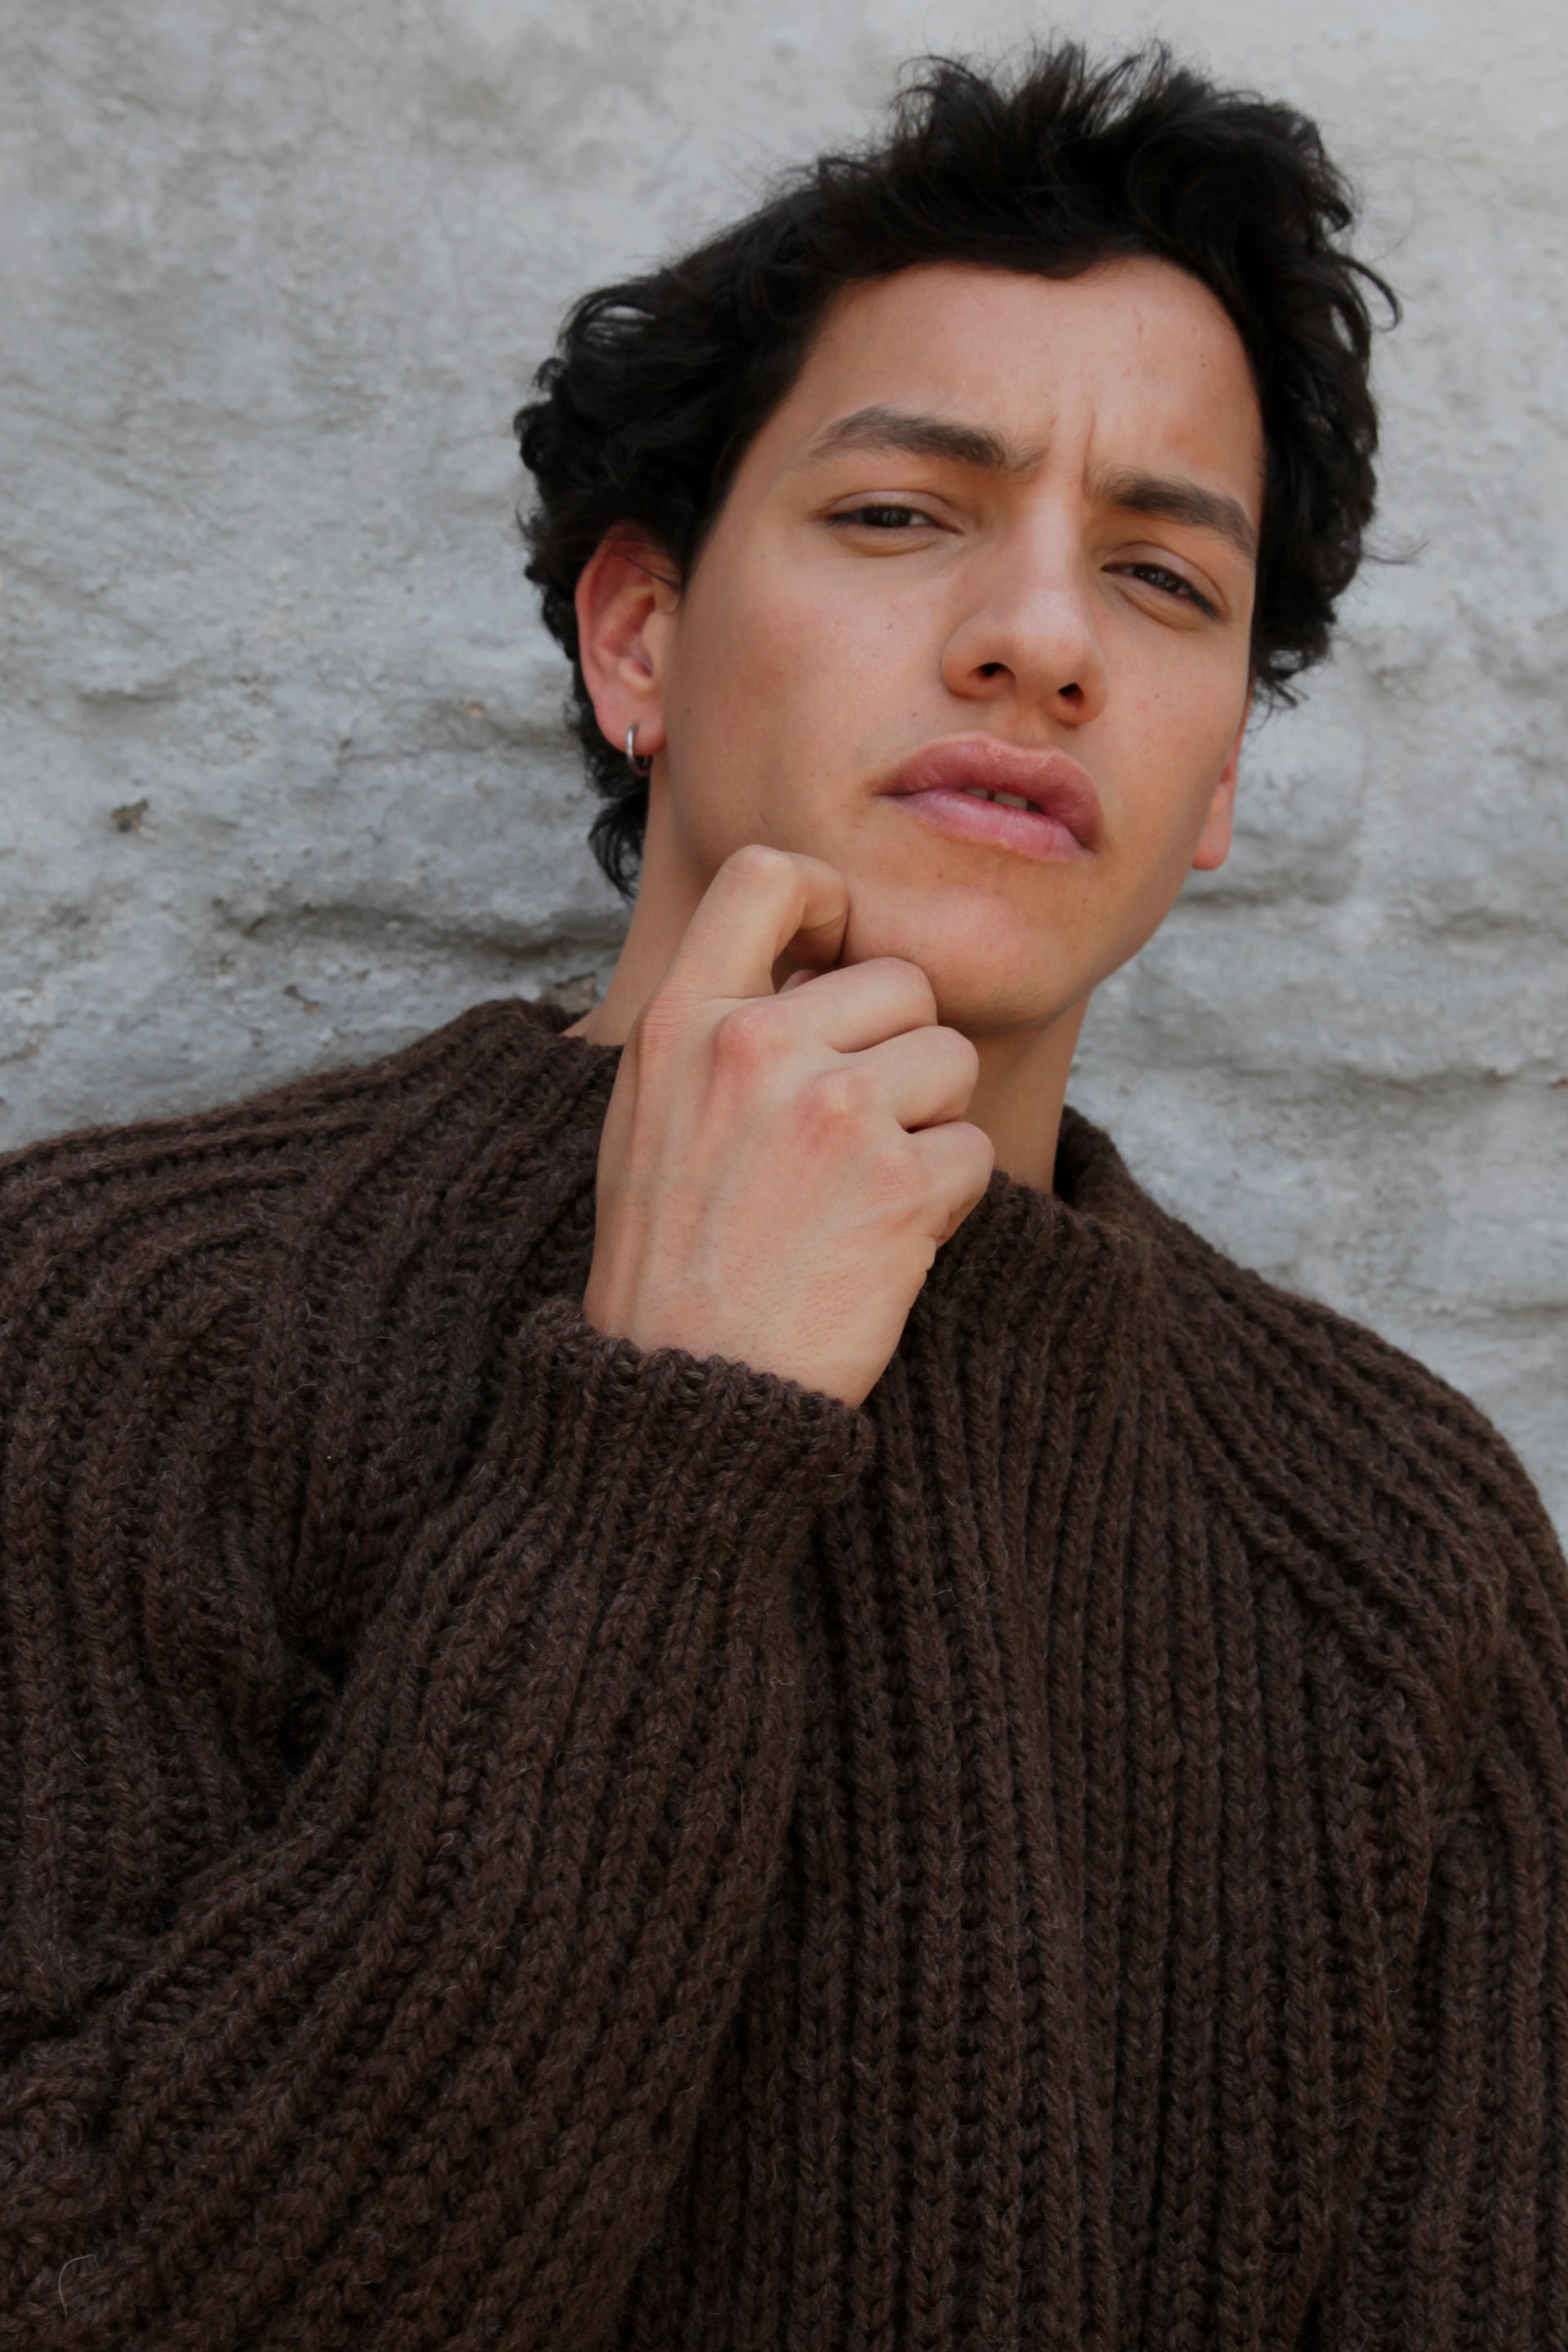 UNDYED, WOOL, HAND-KNITTED, JUMPER, SWEATER, FISHERMAN RIBB, STYLISH, SUSTAINABLE, HAND-CRAFTED, MENSWEAR